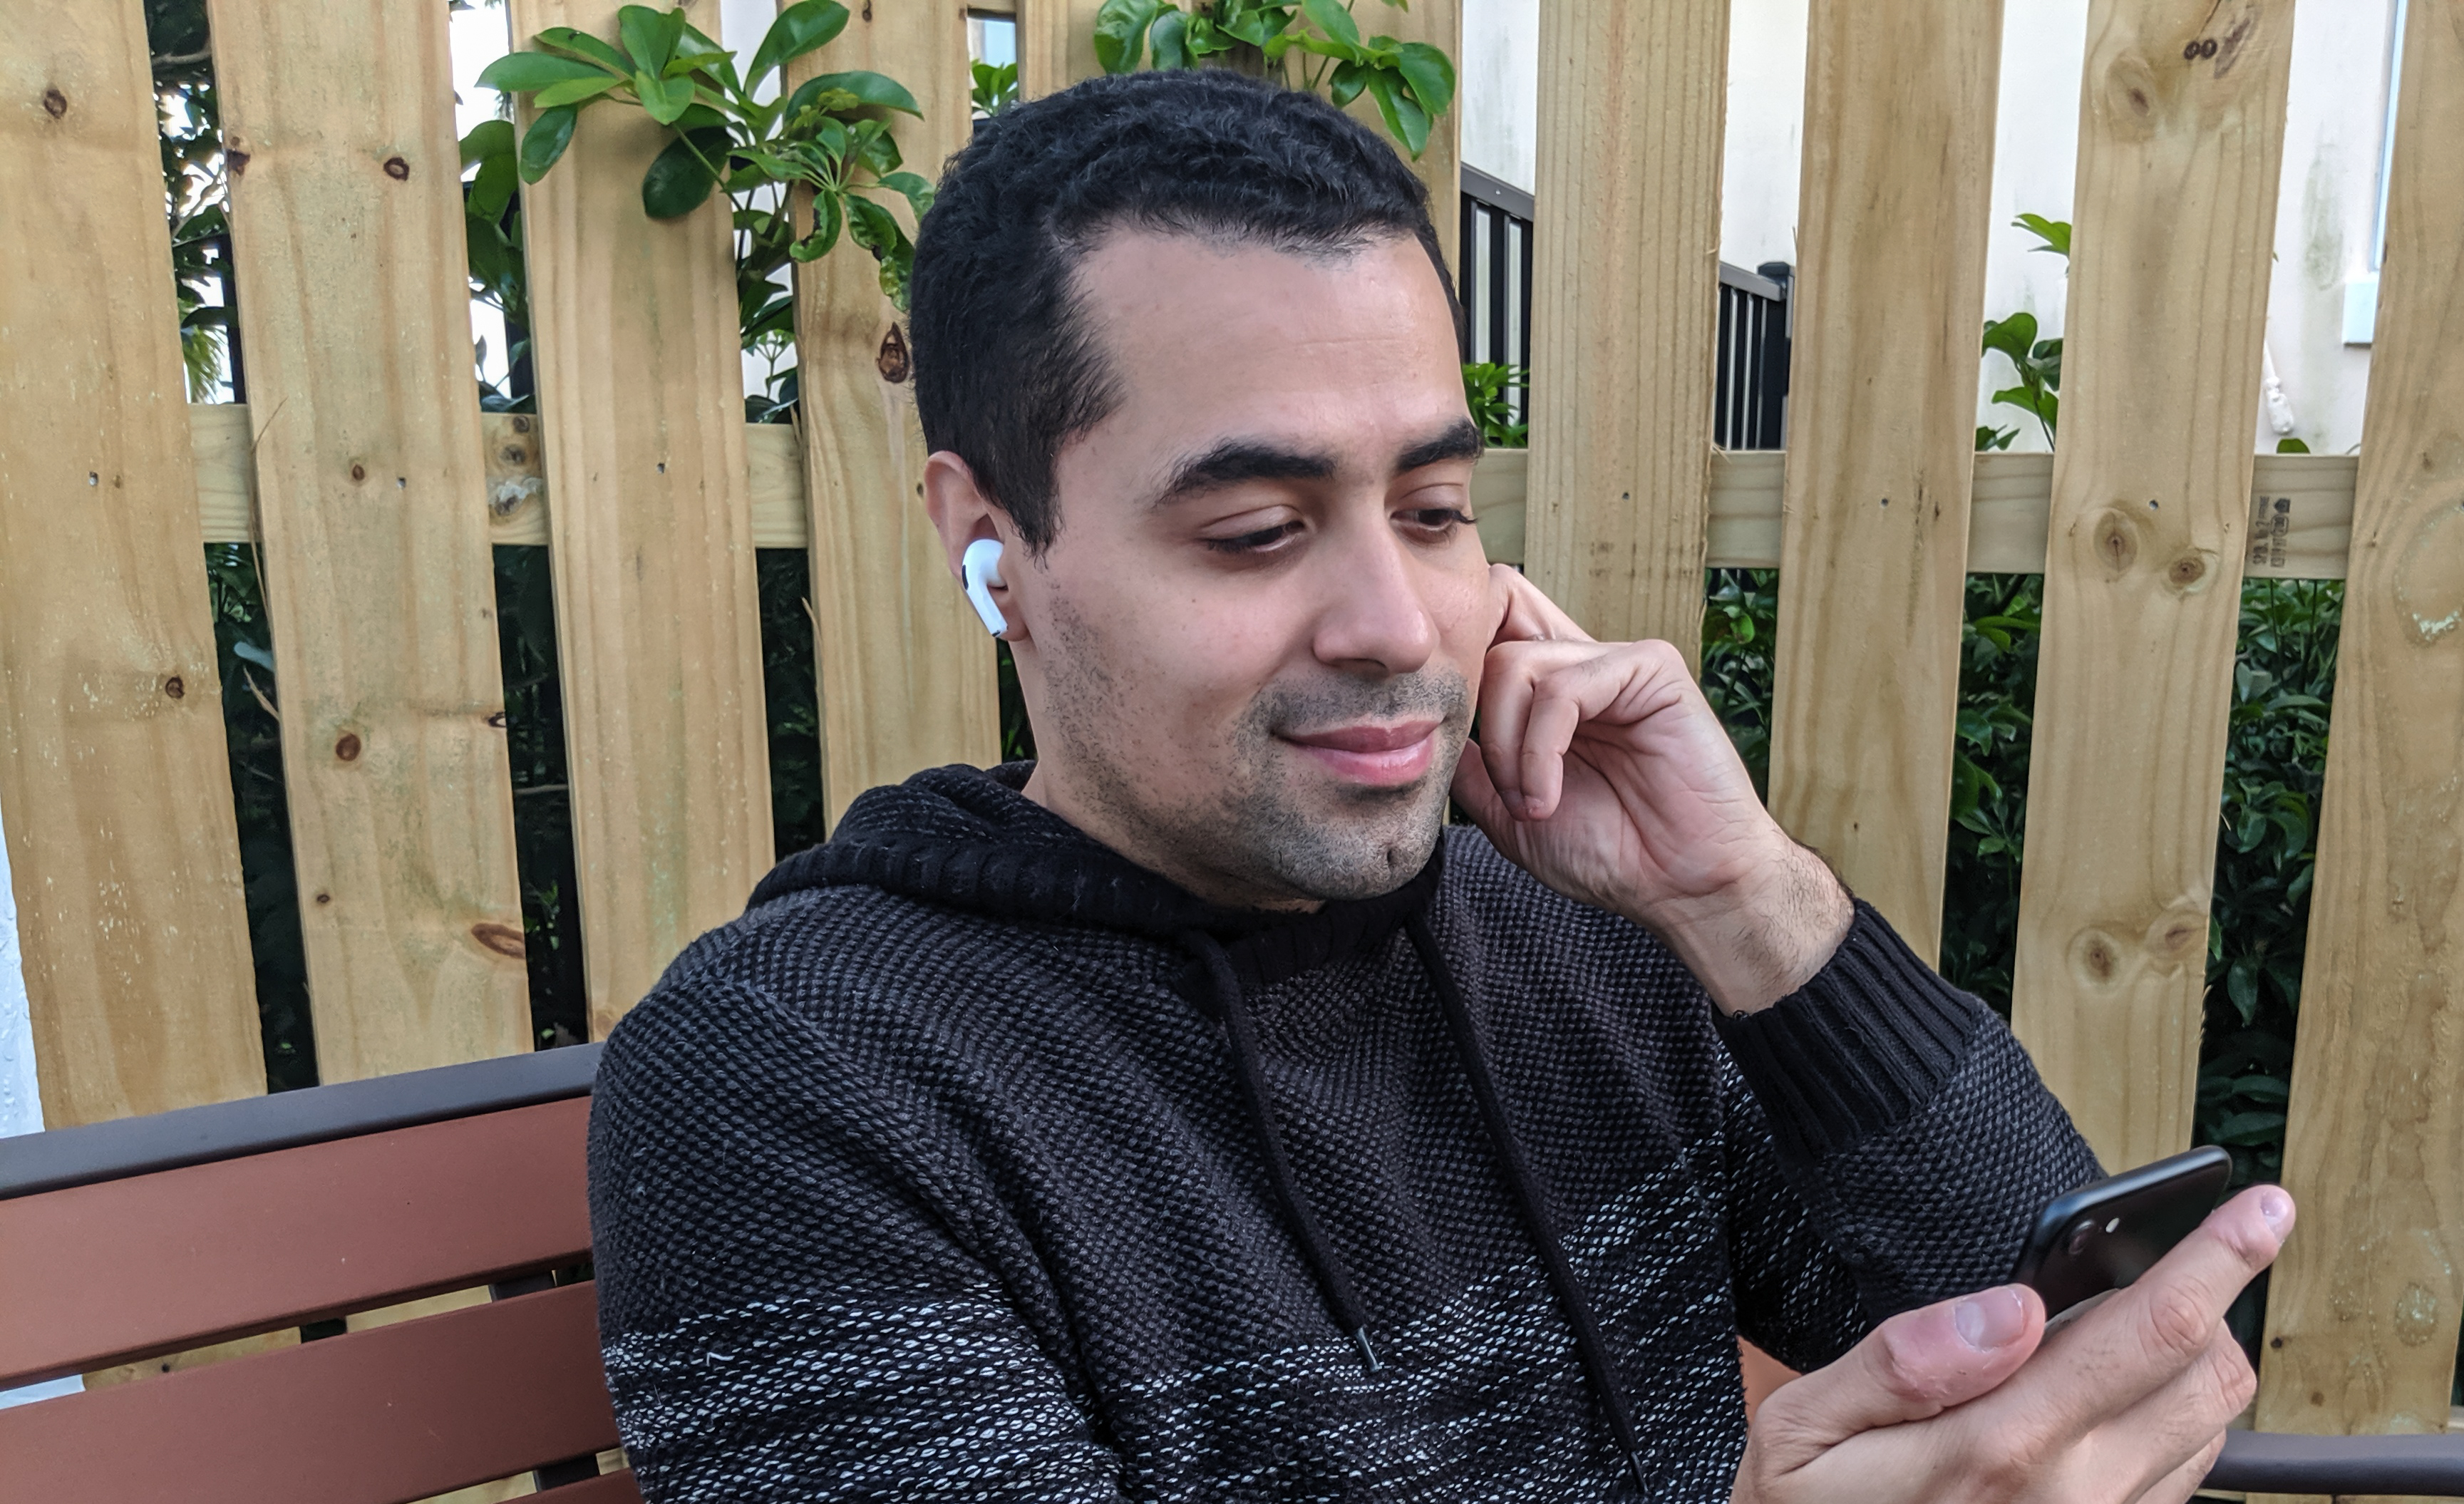 A FaceTime call being taken on the AirPods Pro